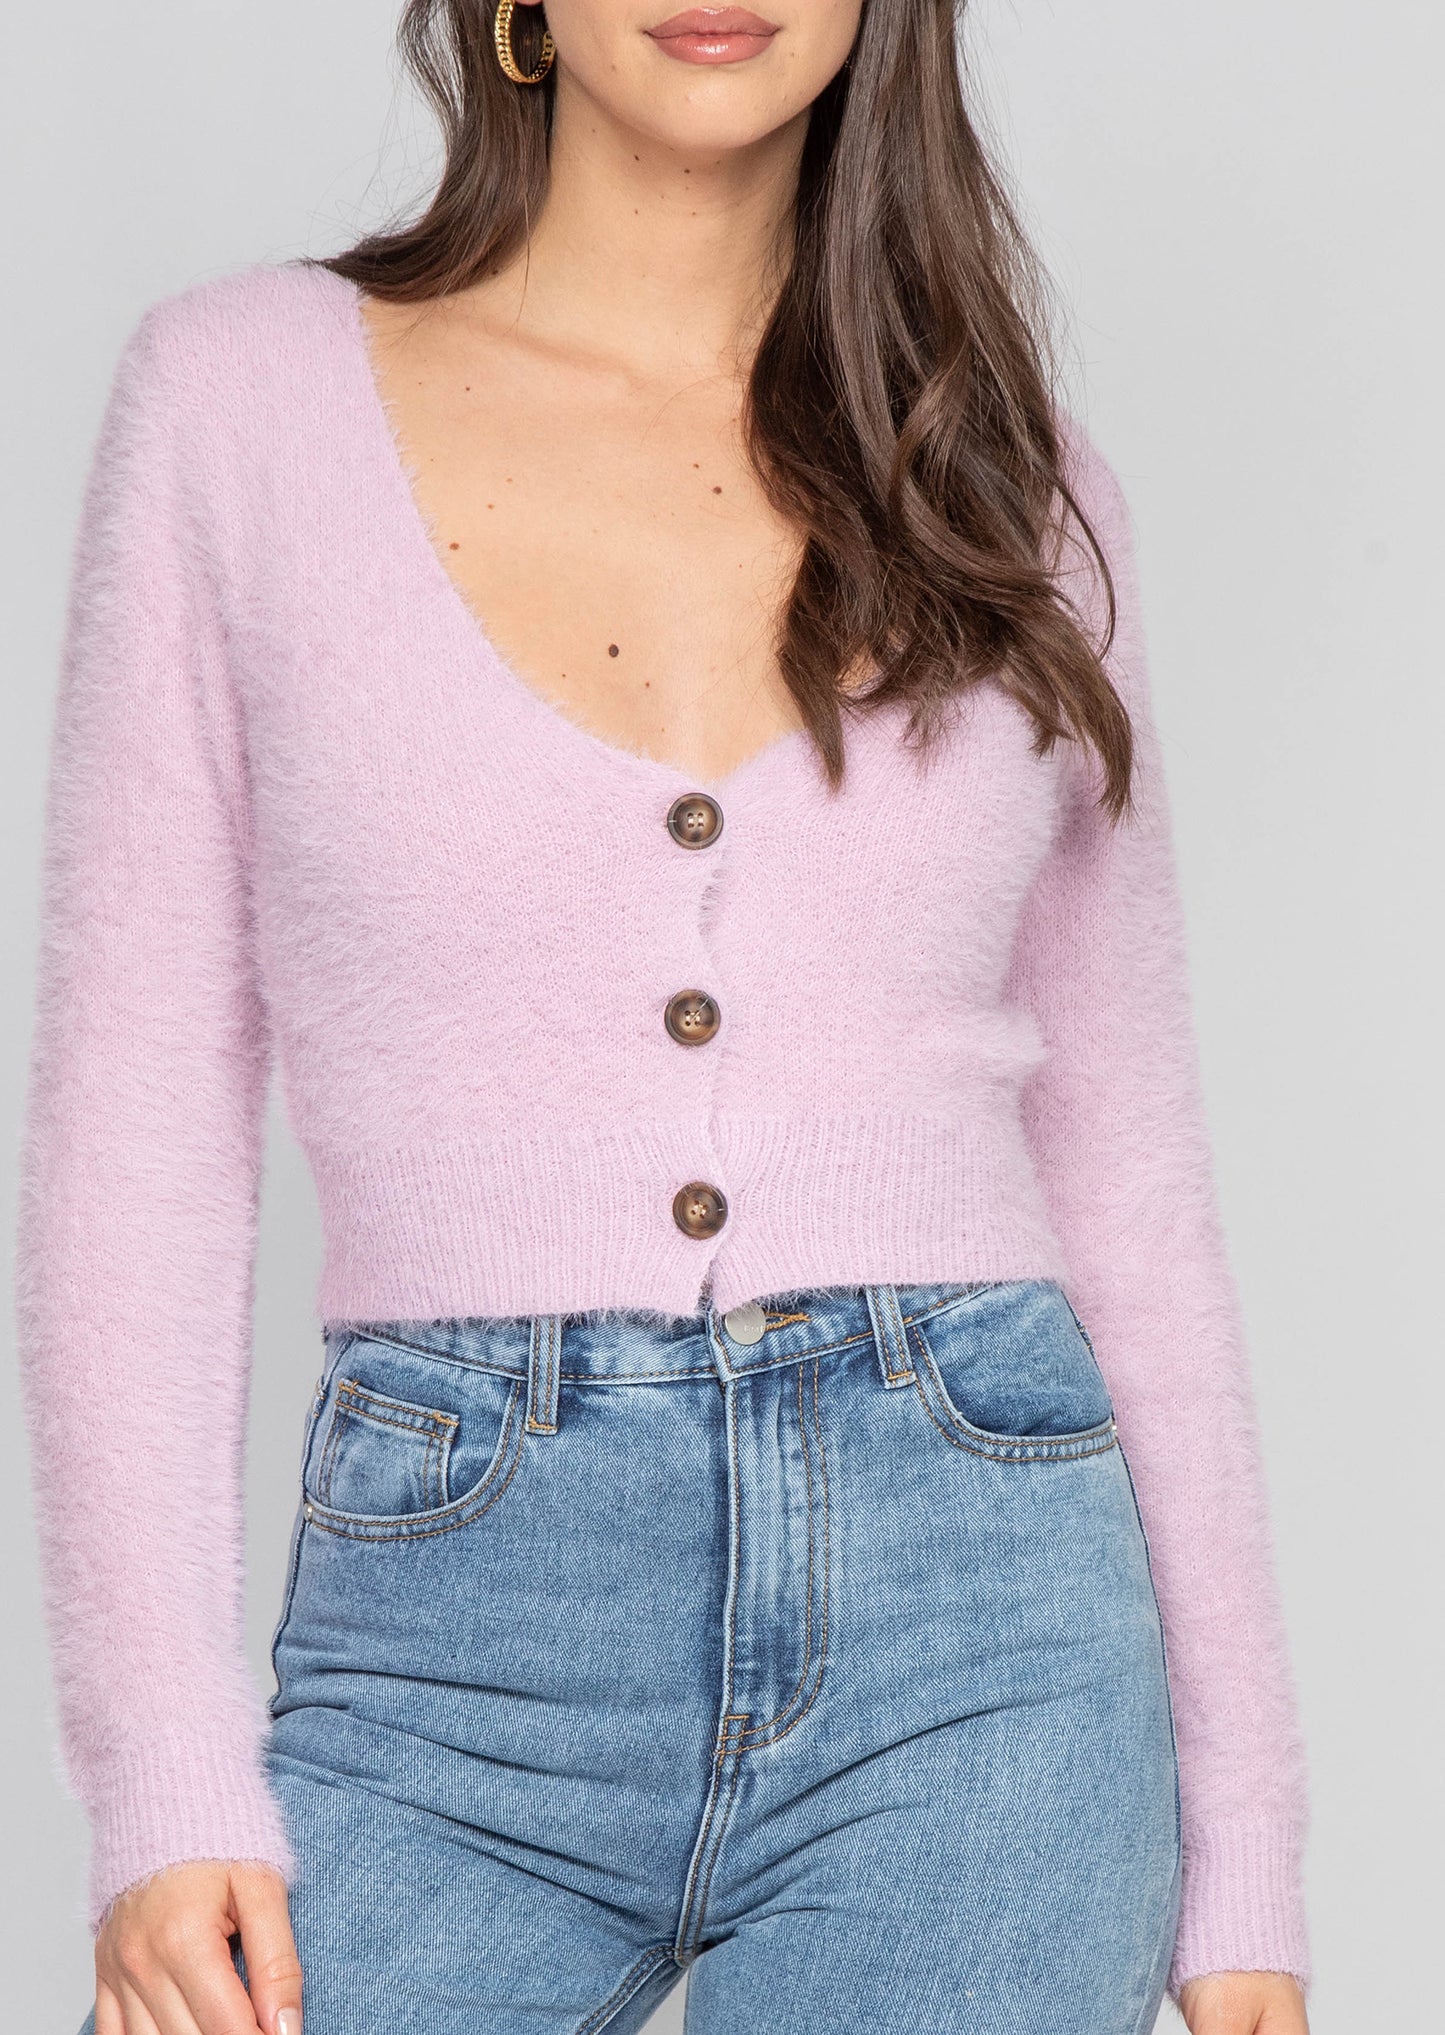 Fluffy cropped cardigan in lilac